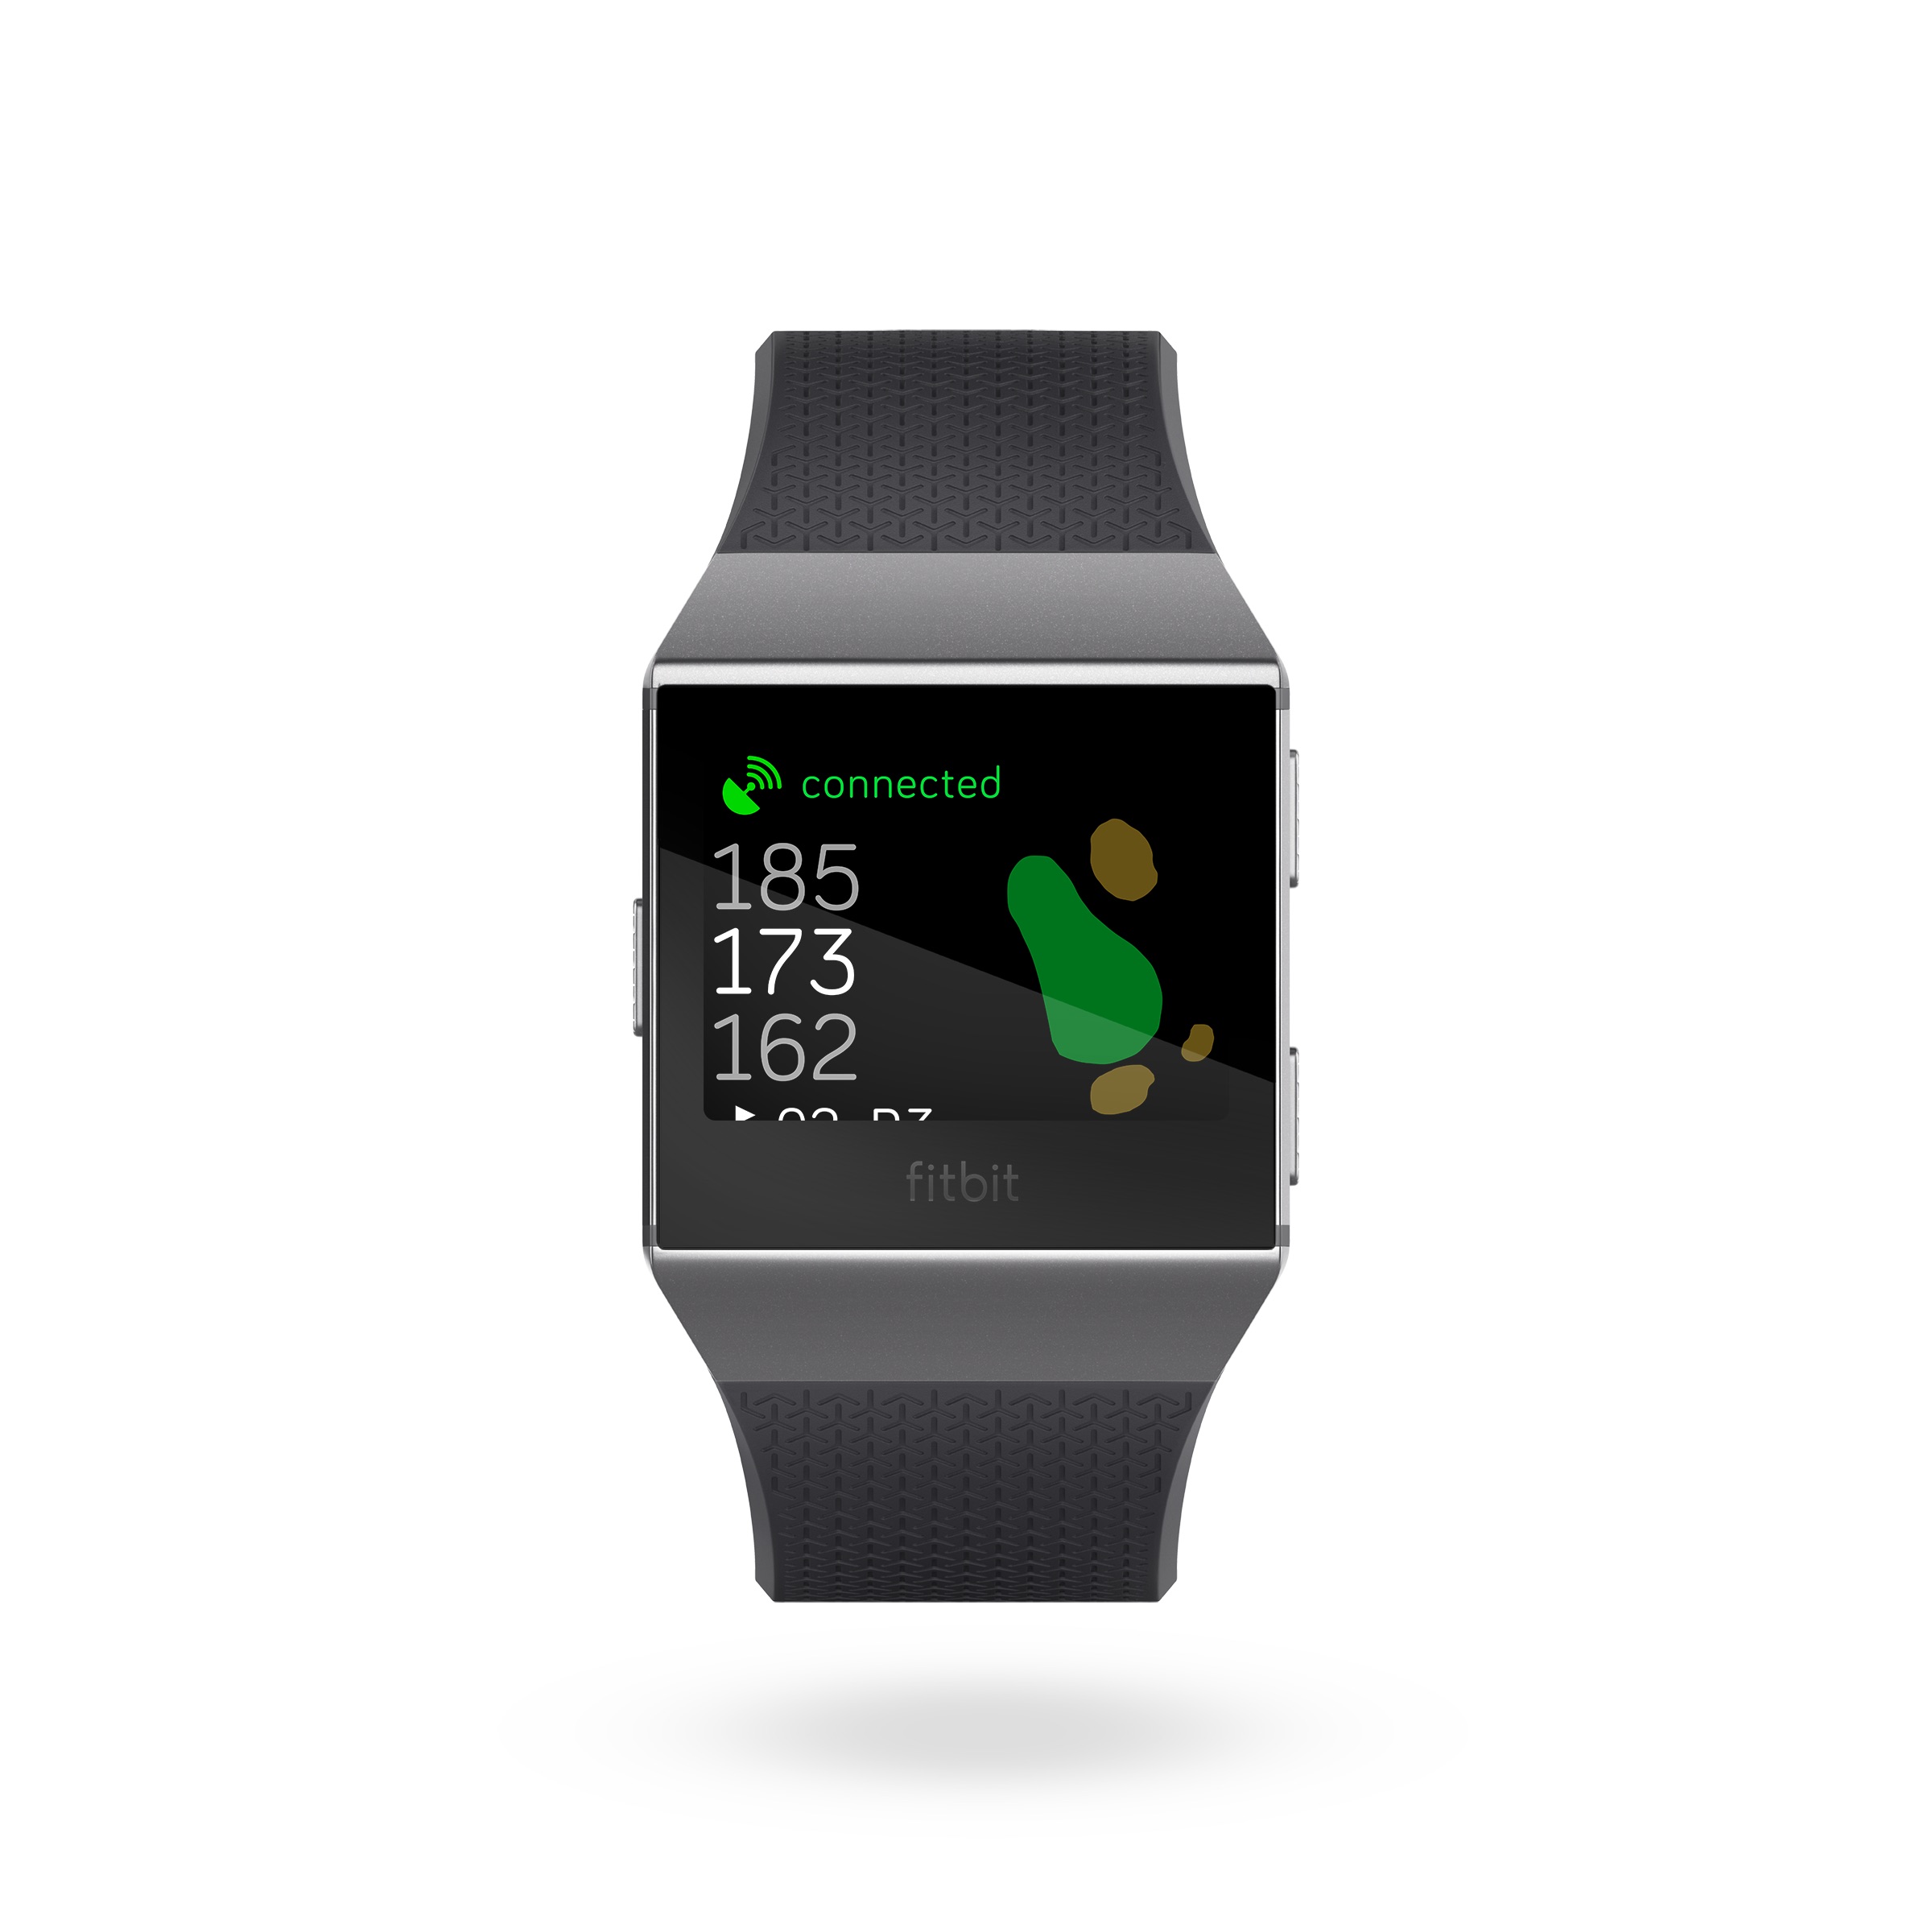 apps-for-fitbit-GAME-GOLF - Fitbit Blog